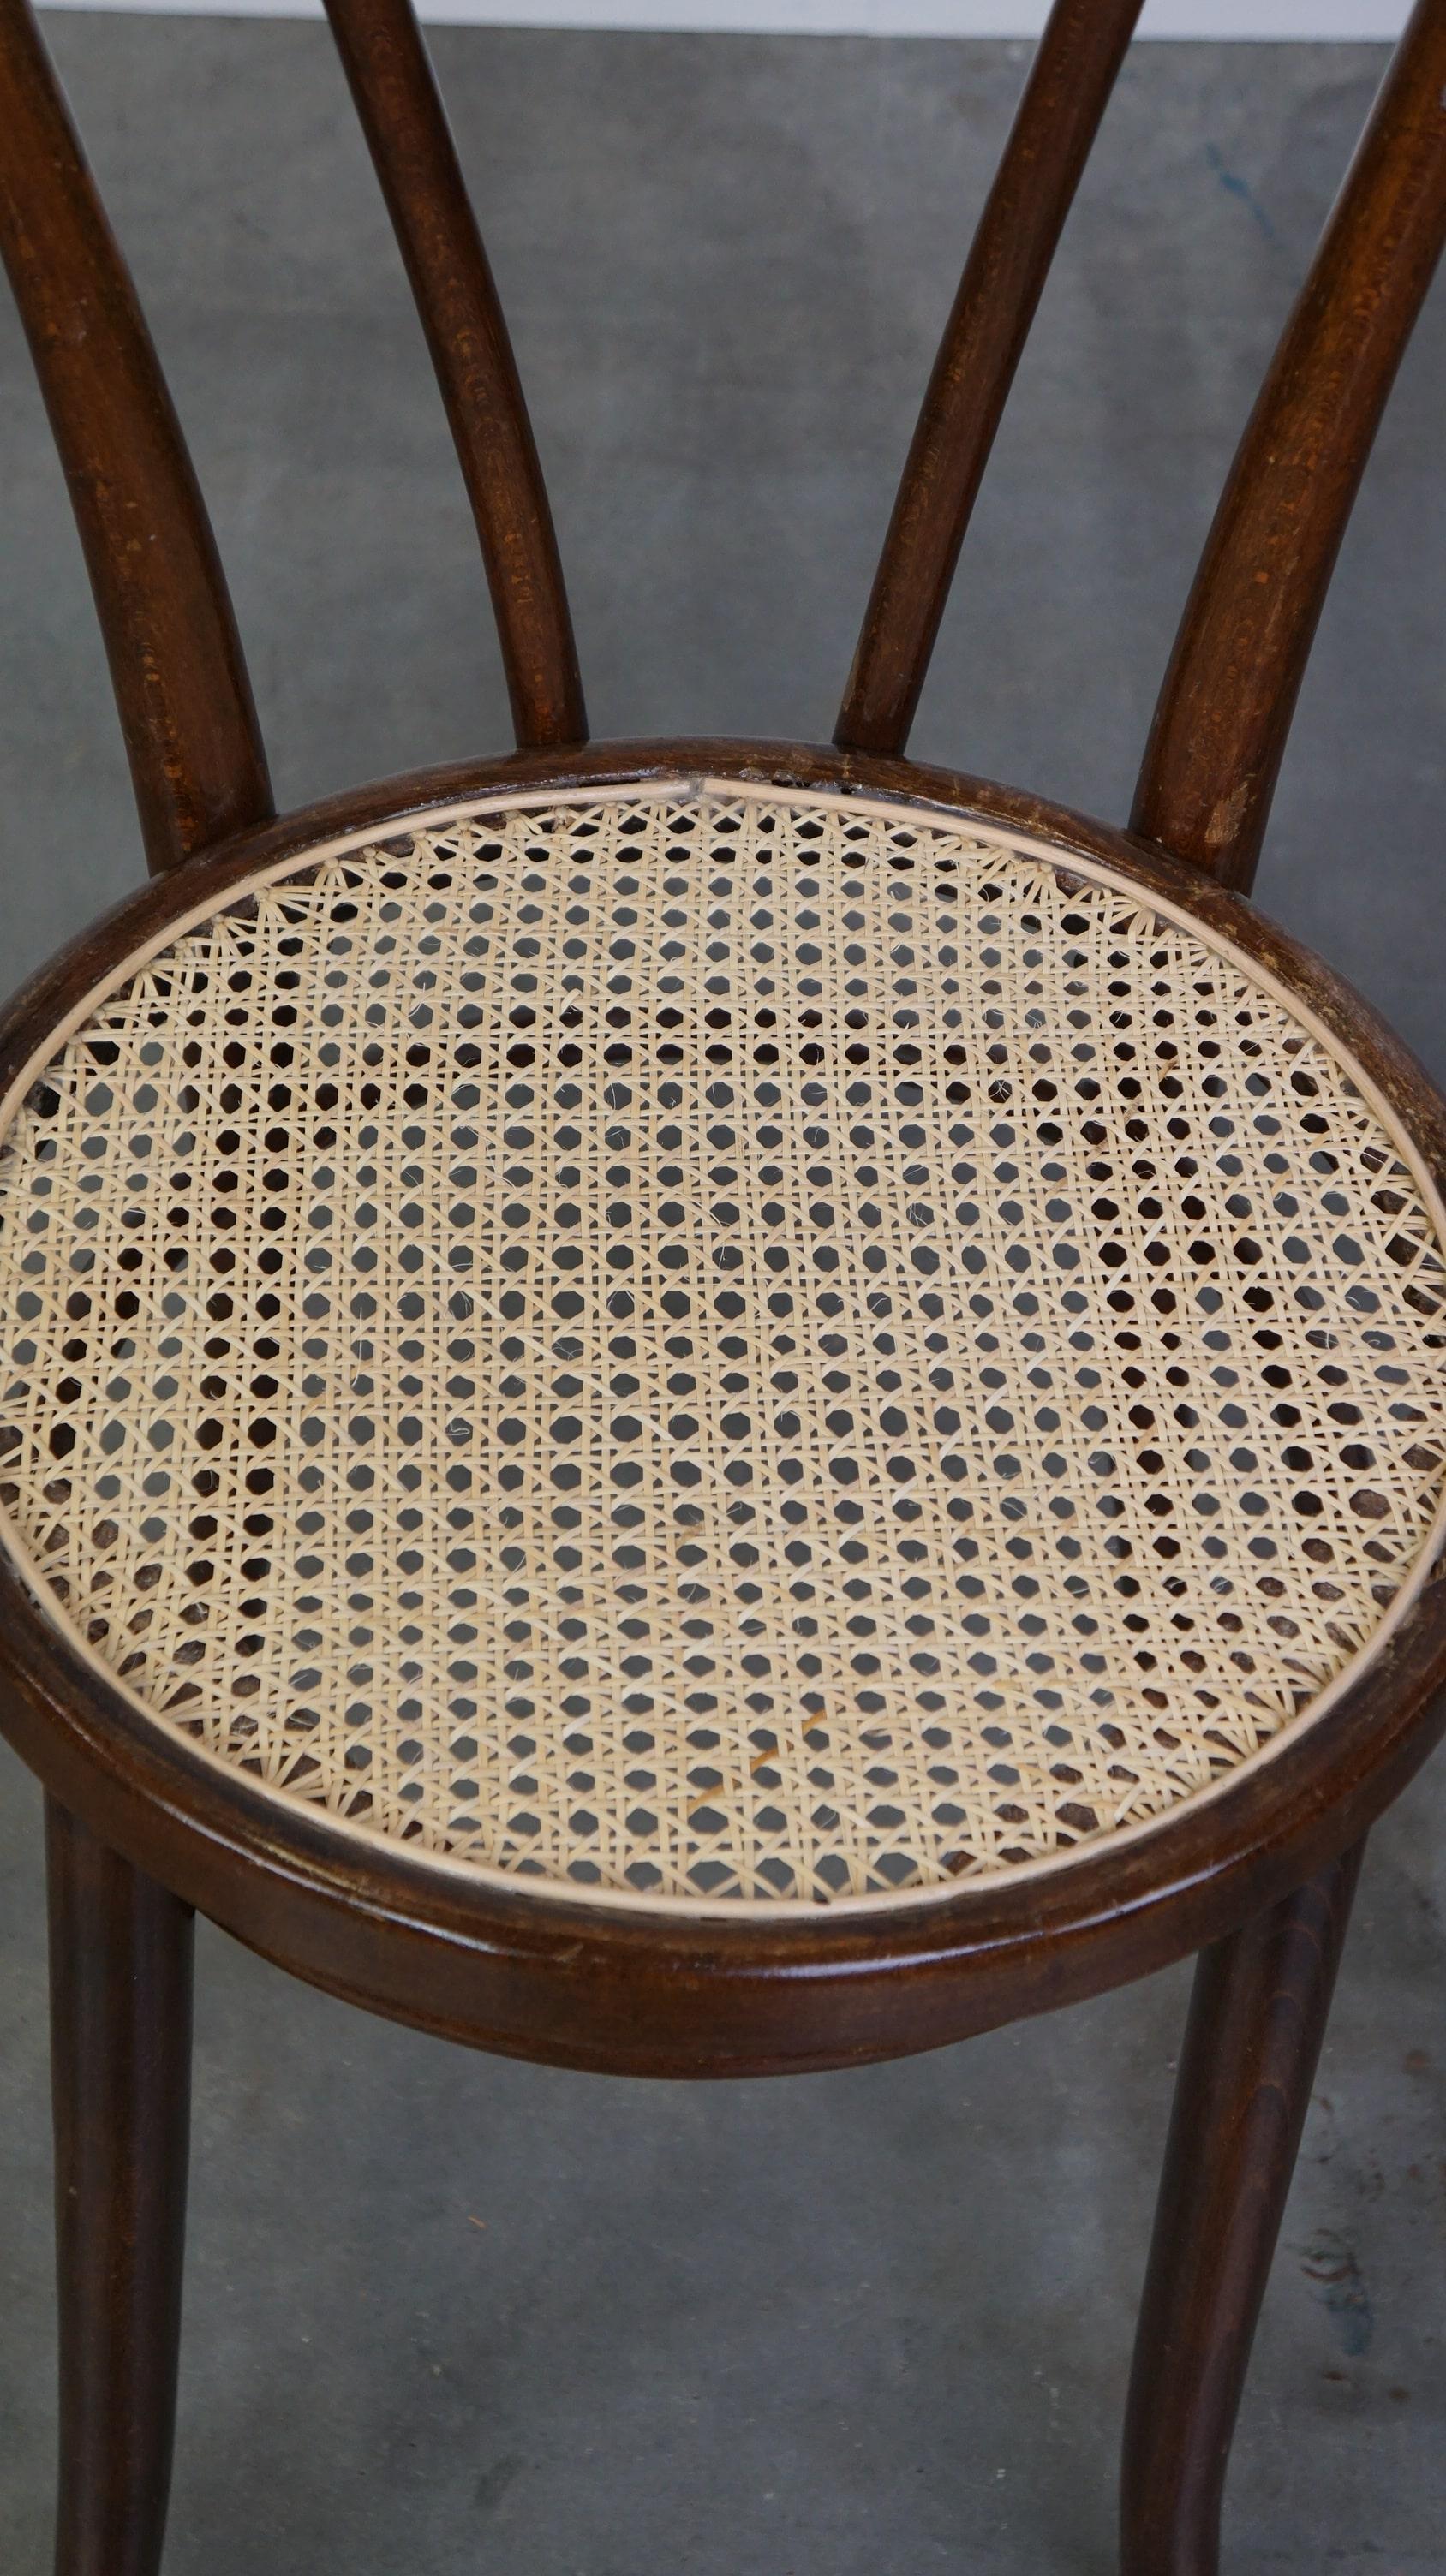 Original antique bentwood Thonet chair model no. 18 with a new woven seat For Sale 1